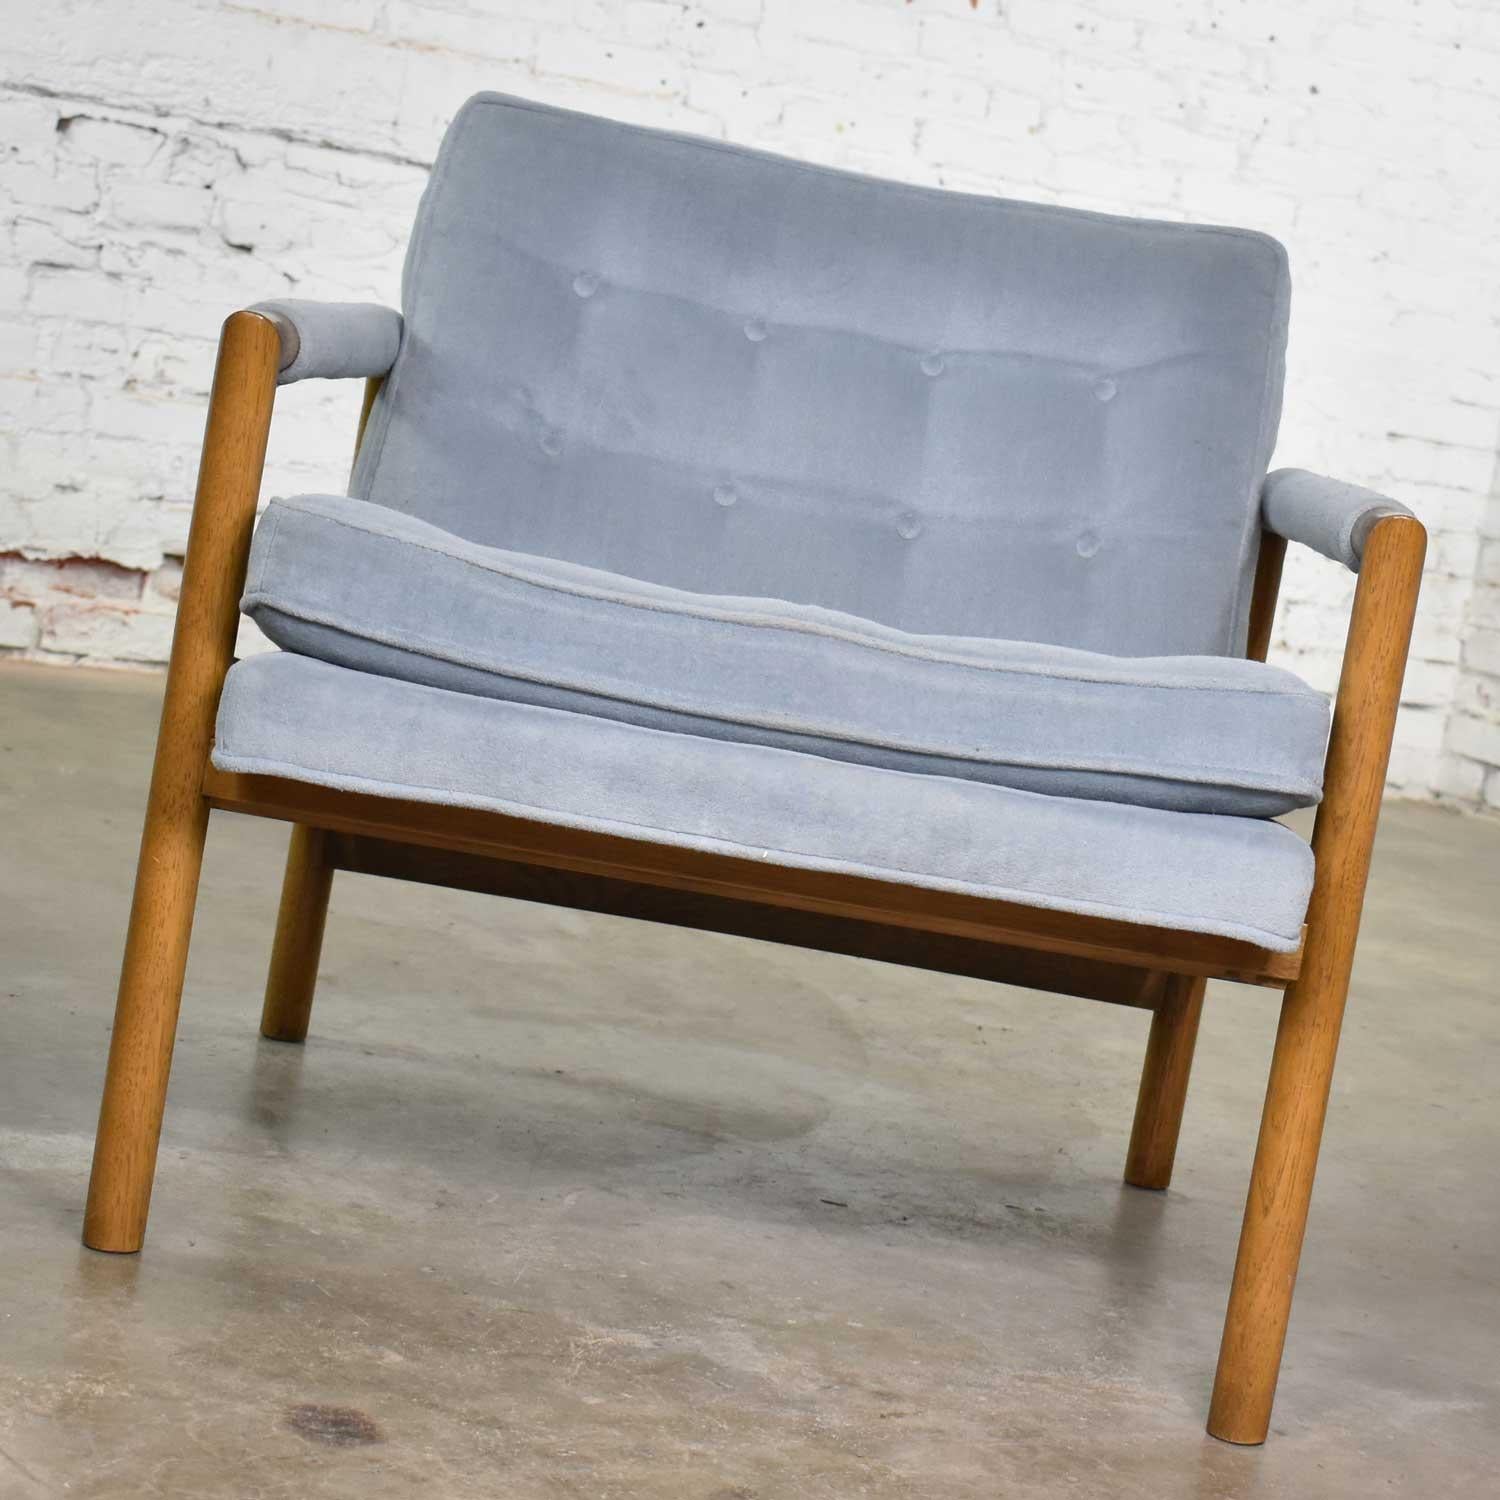 American Mid-Century Modern Lounge Club Chair with Wood Frame and Ice Blue Velvet